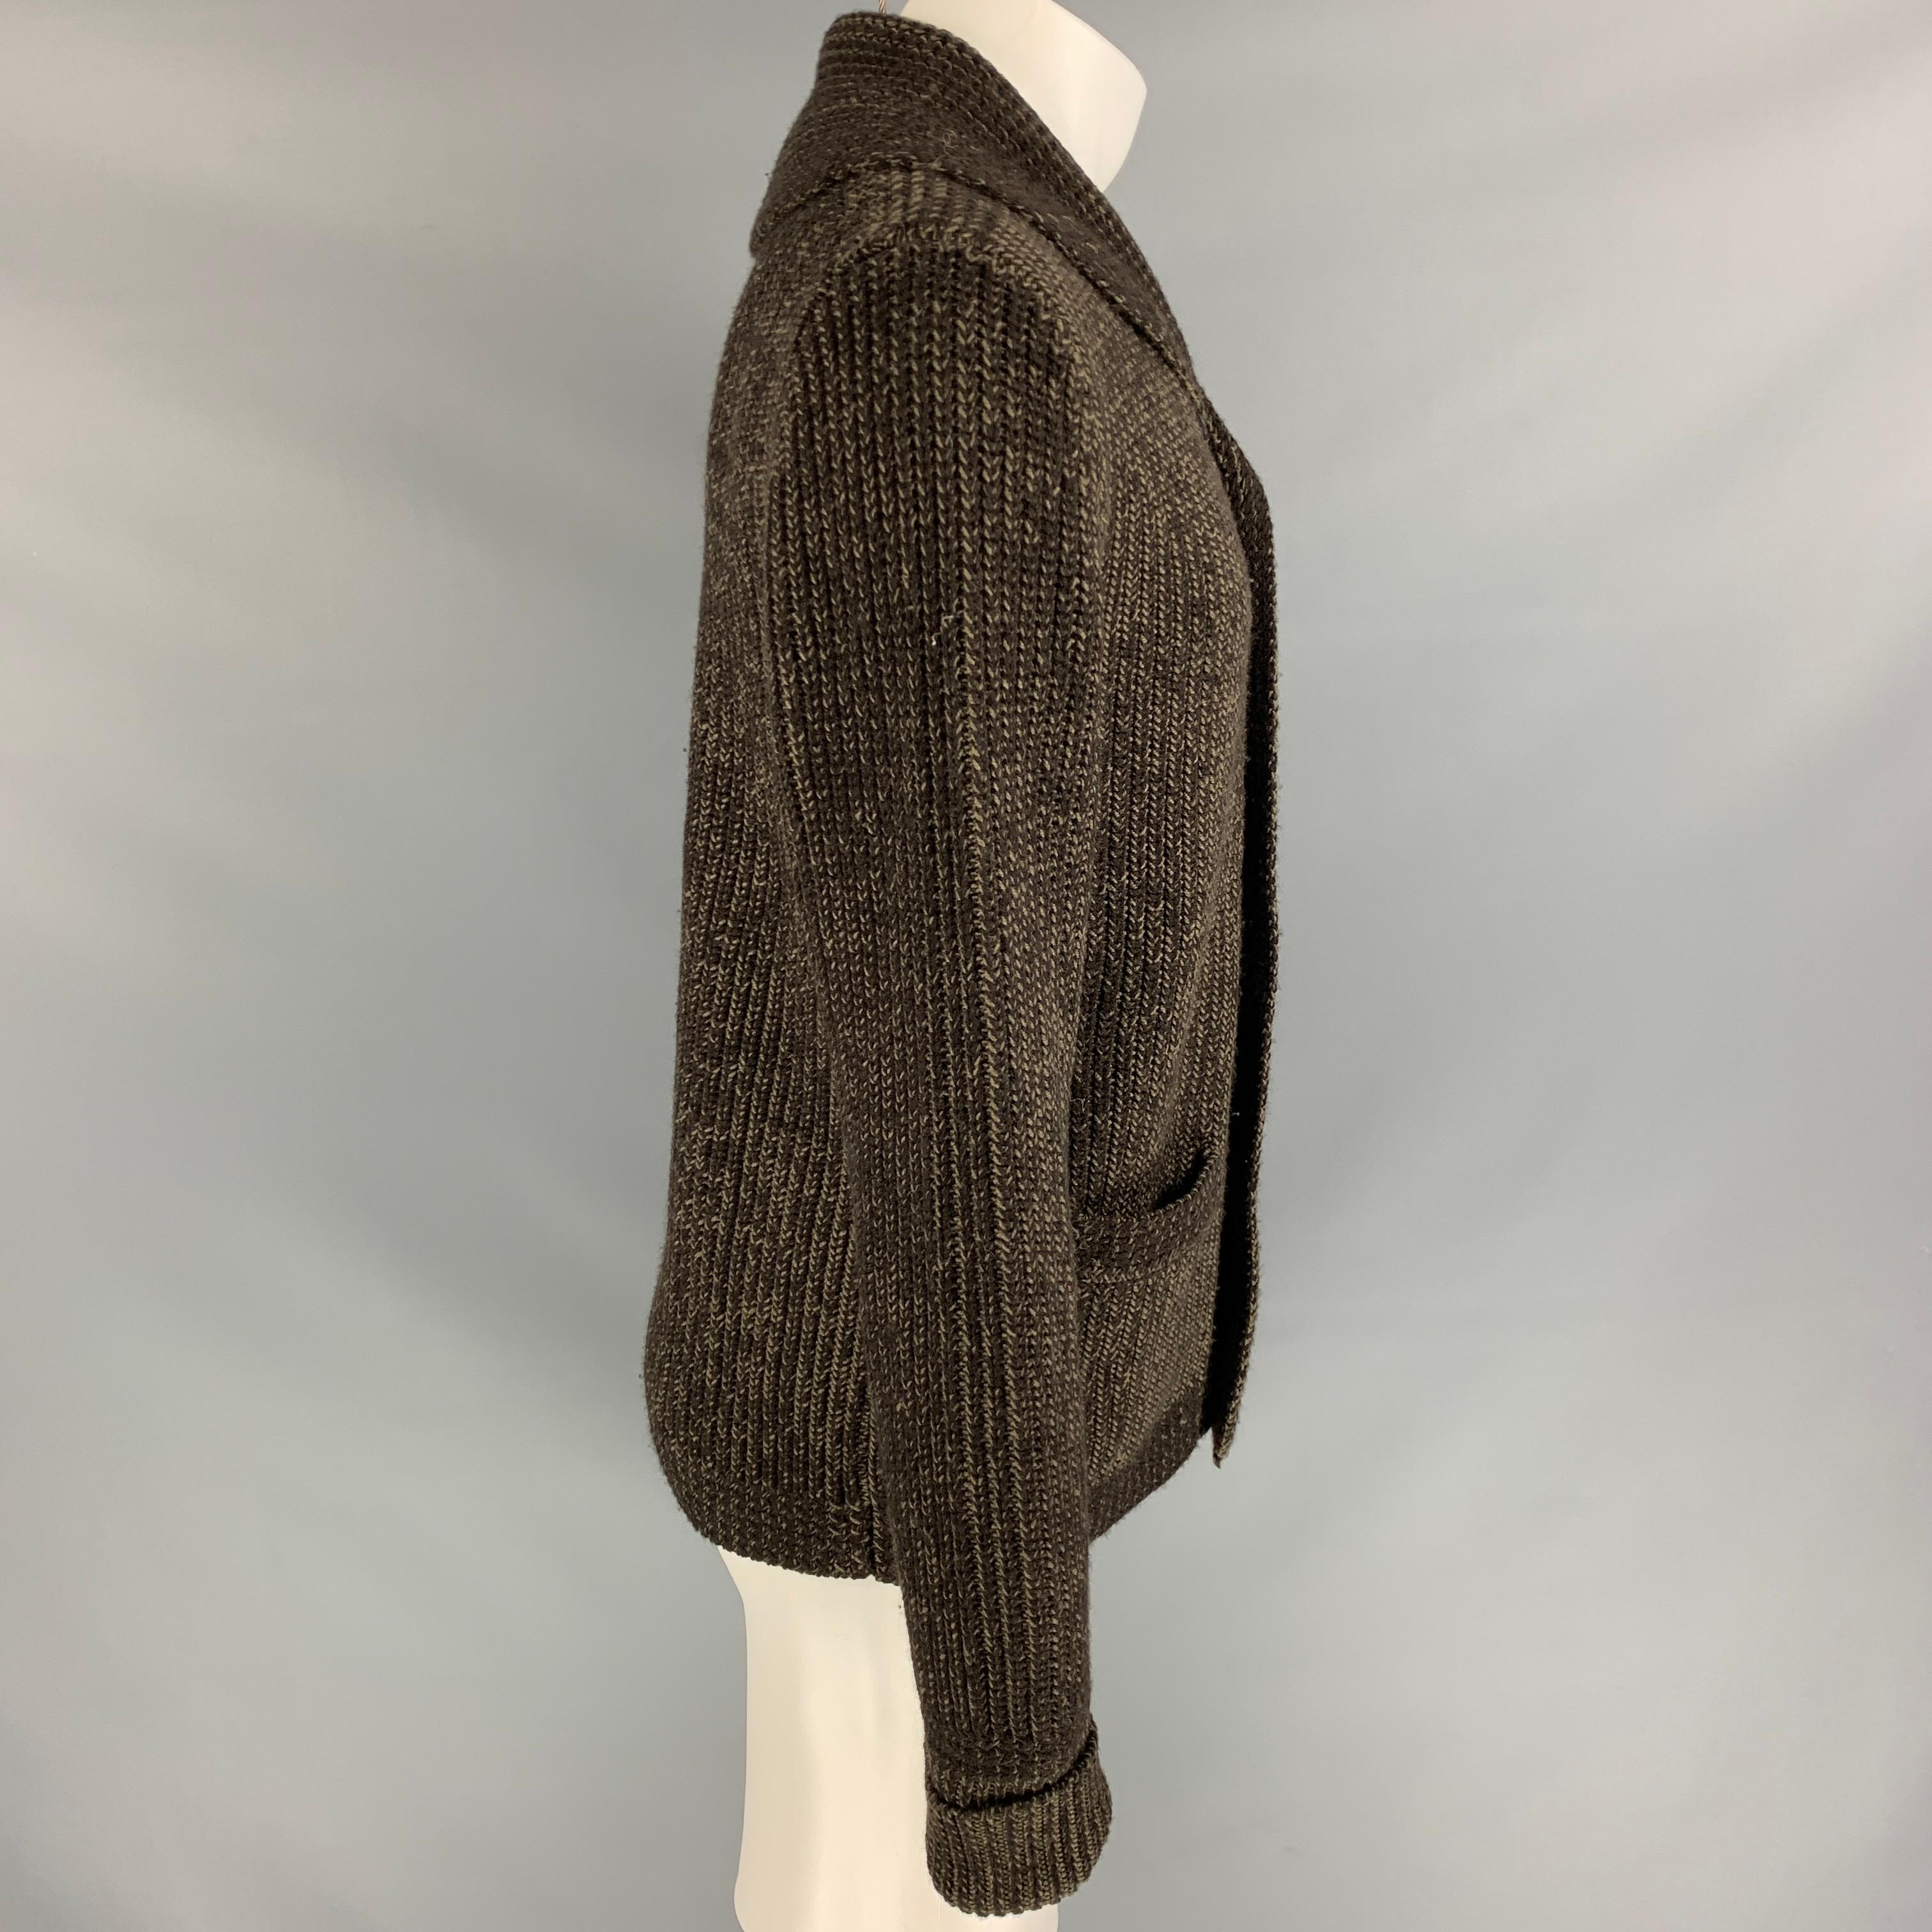 RRL by RALPH LAUREN jacket comes in a brown & olive knitted wool featuring a shawl collar, front pockets, and a buttoned closure. 

Very Good Pre-Owned Condition.
Marked: M

Measurements:

Shoulder: 18 in.
Chest: 42 in.
Sleeve: 30 in.
Length: 27 in. 